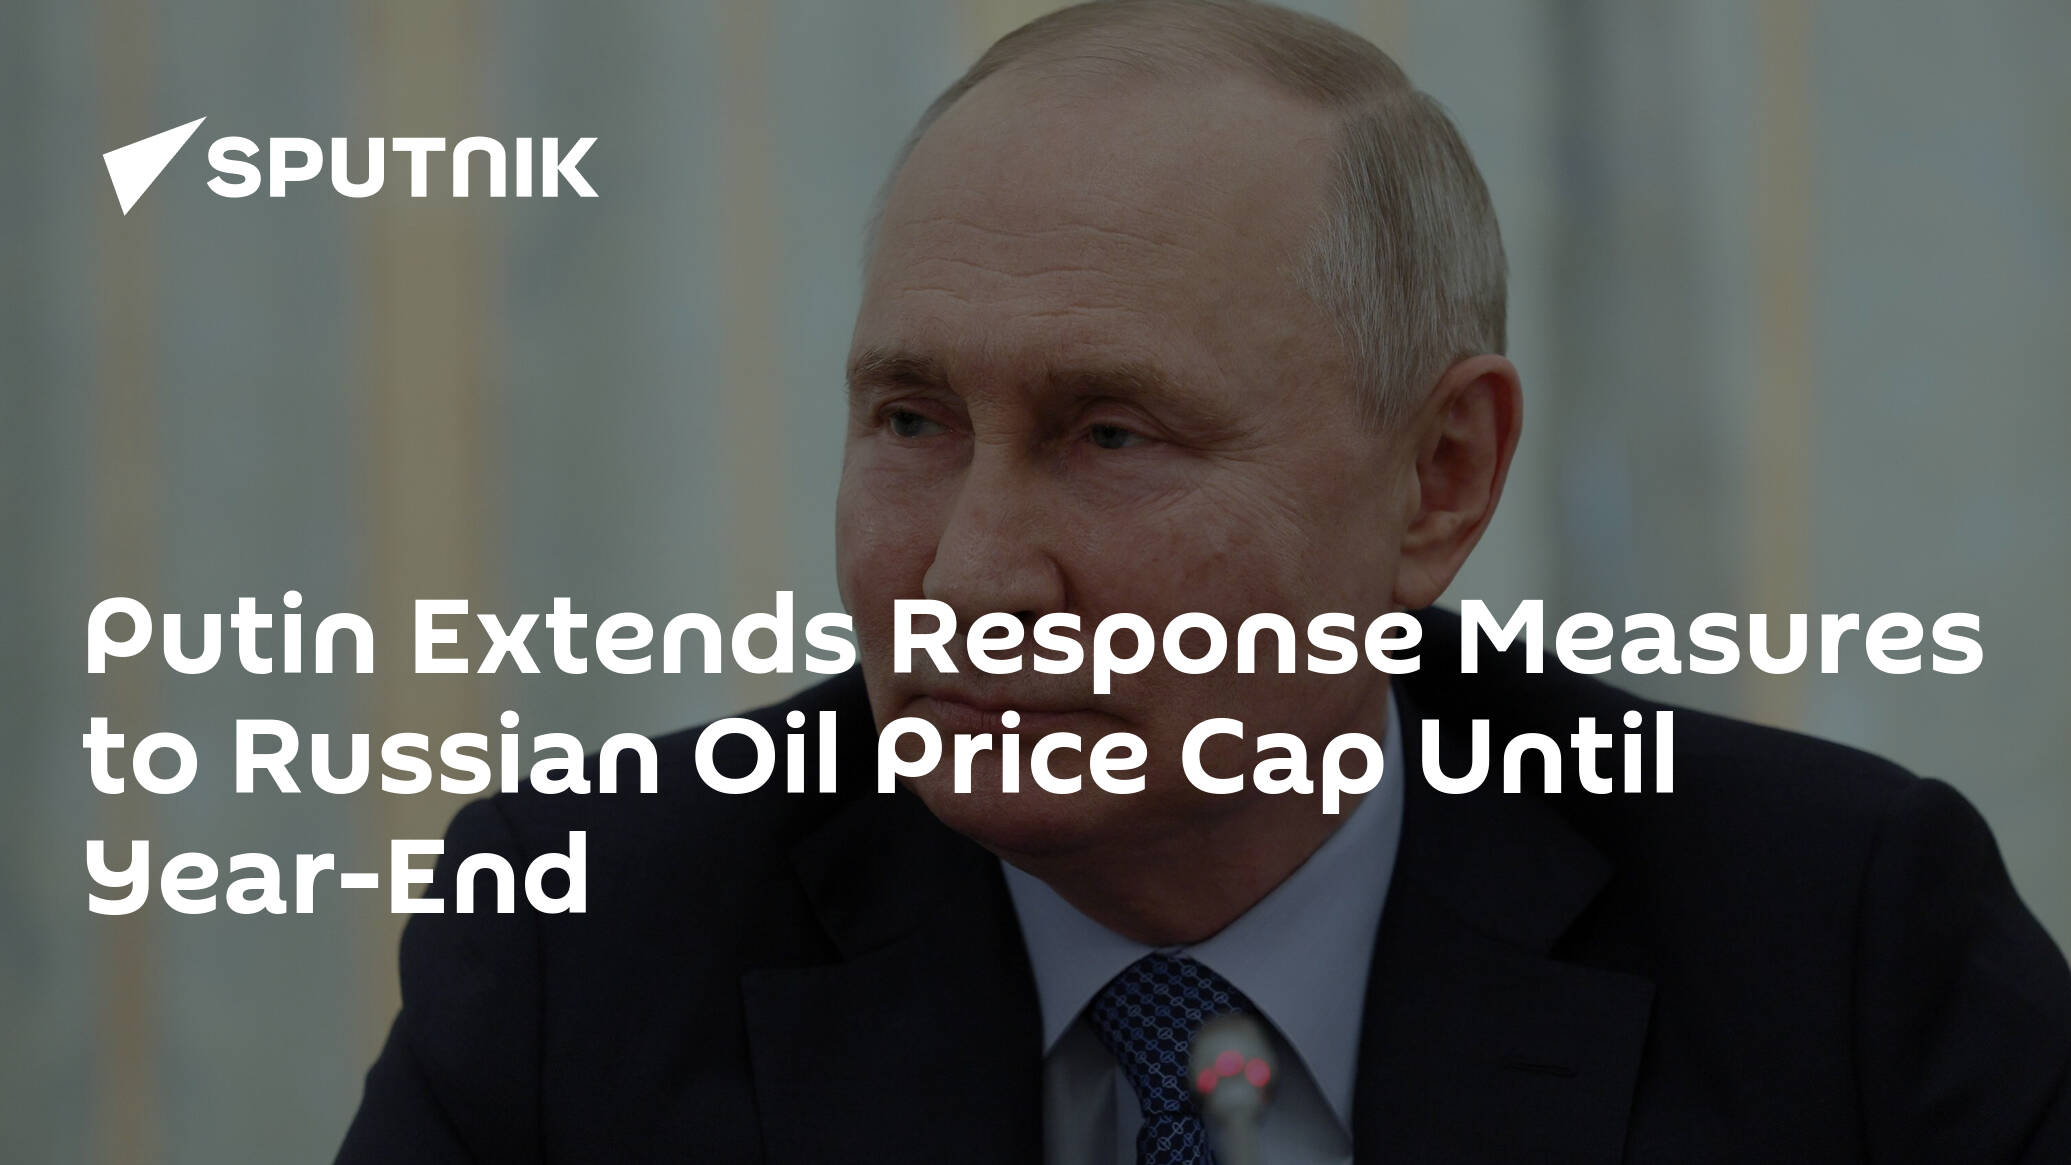 Putin Extends Response Measures to Russian Oil Price Cap Until Year-End